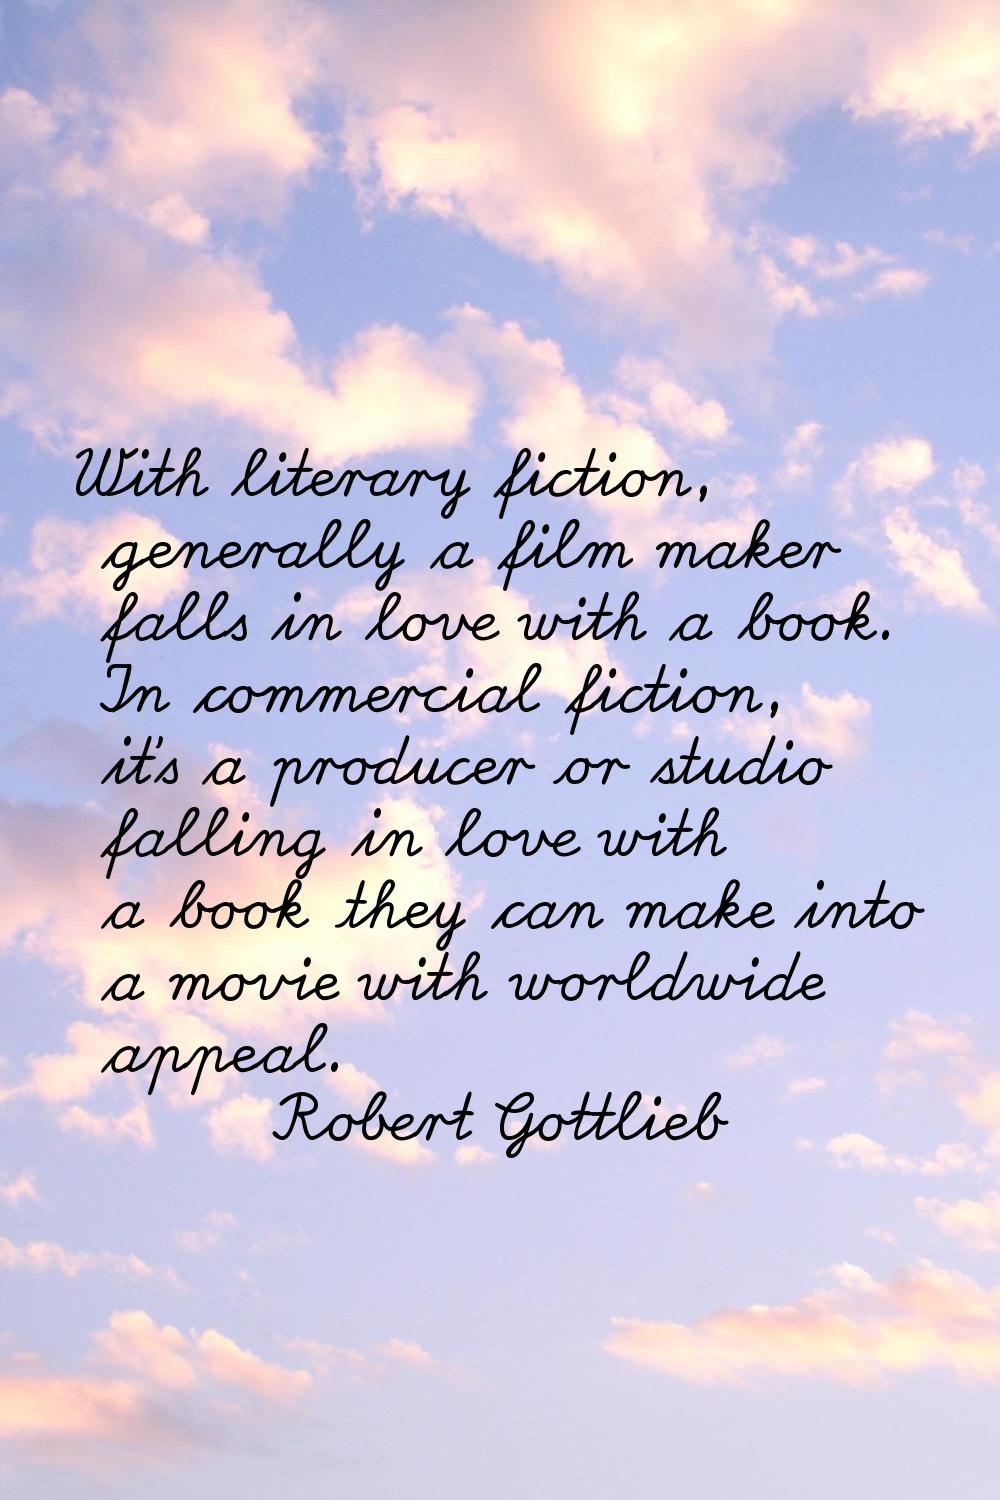 With literary fiction, generally a film maker falls in love with a book. In commercial fiction, it'